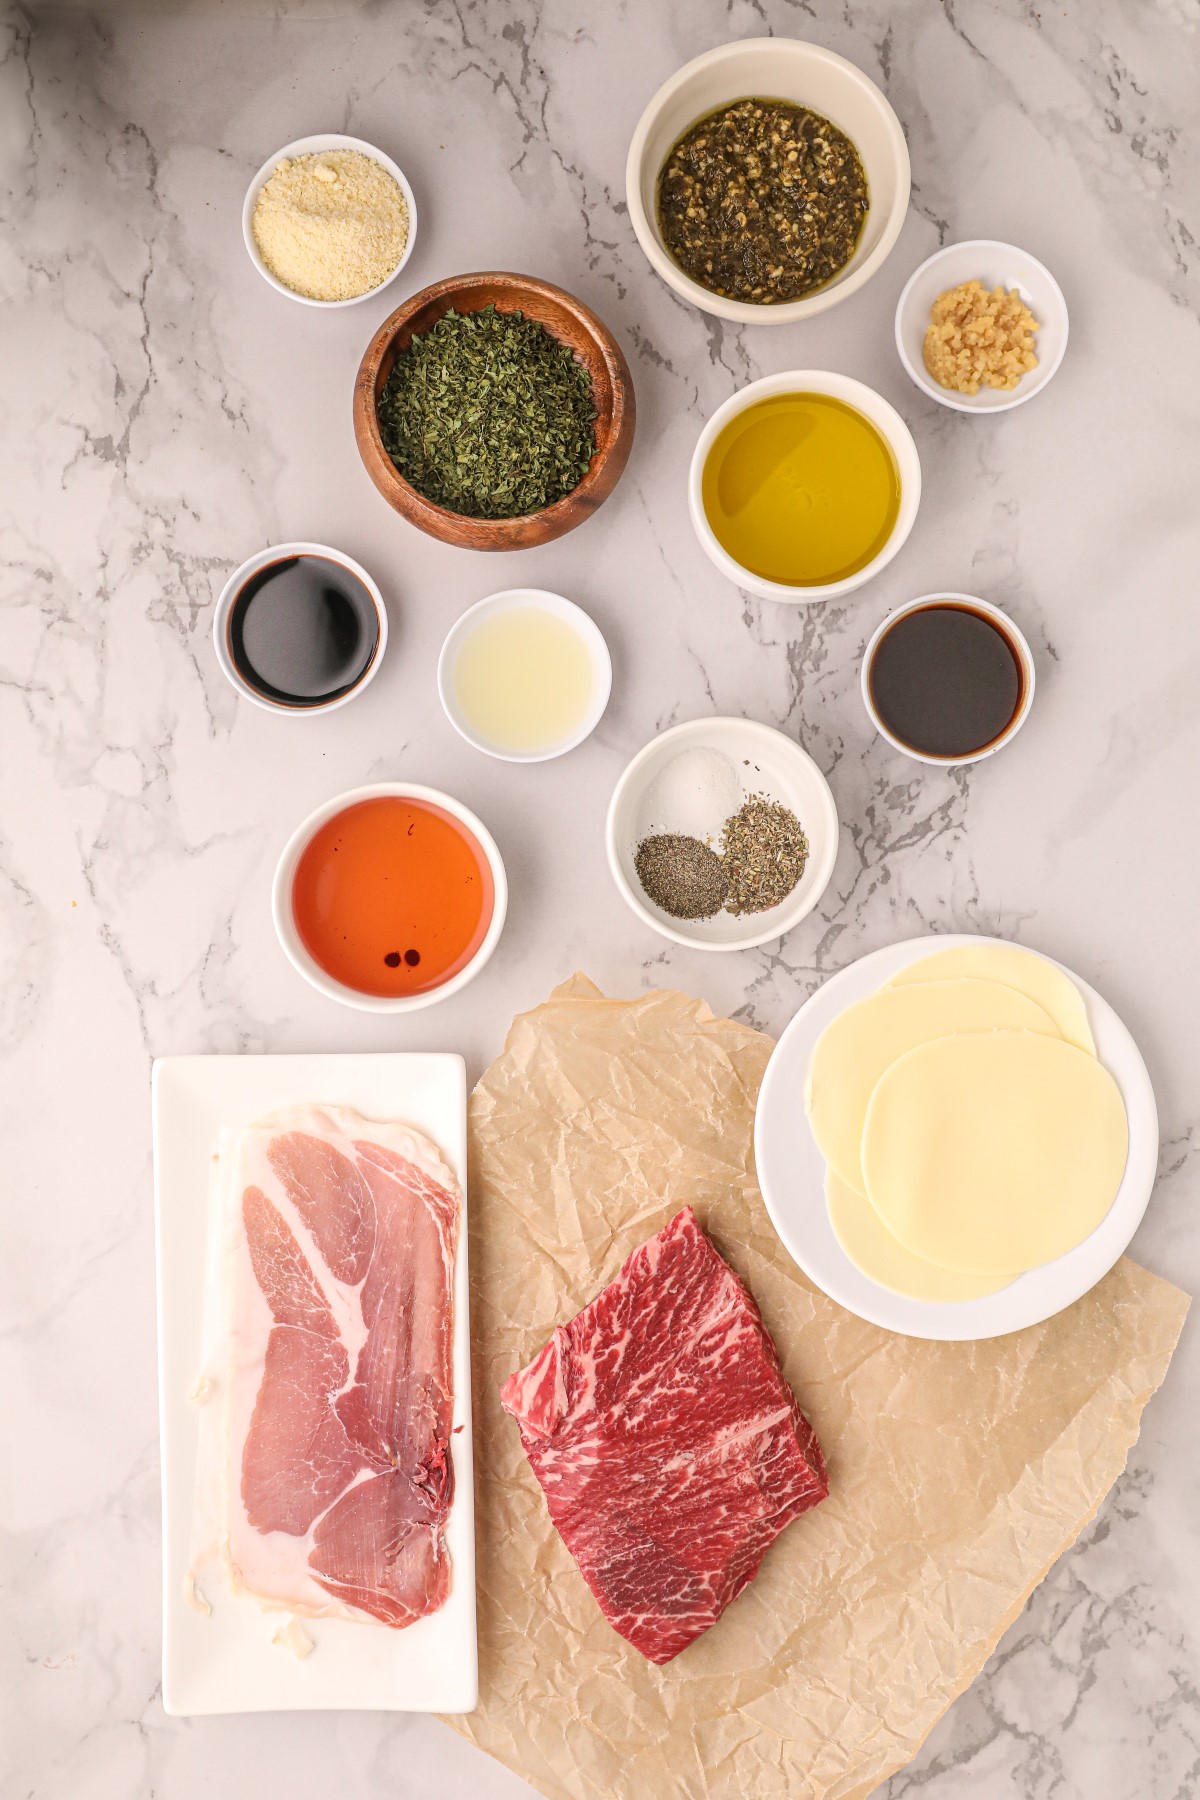 All the ingredients to make the Italian Stuffed London broil laid out on a marble countertop.